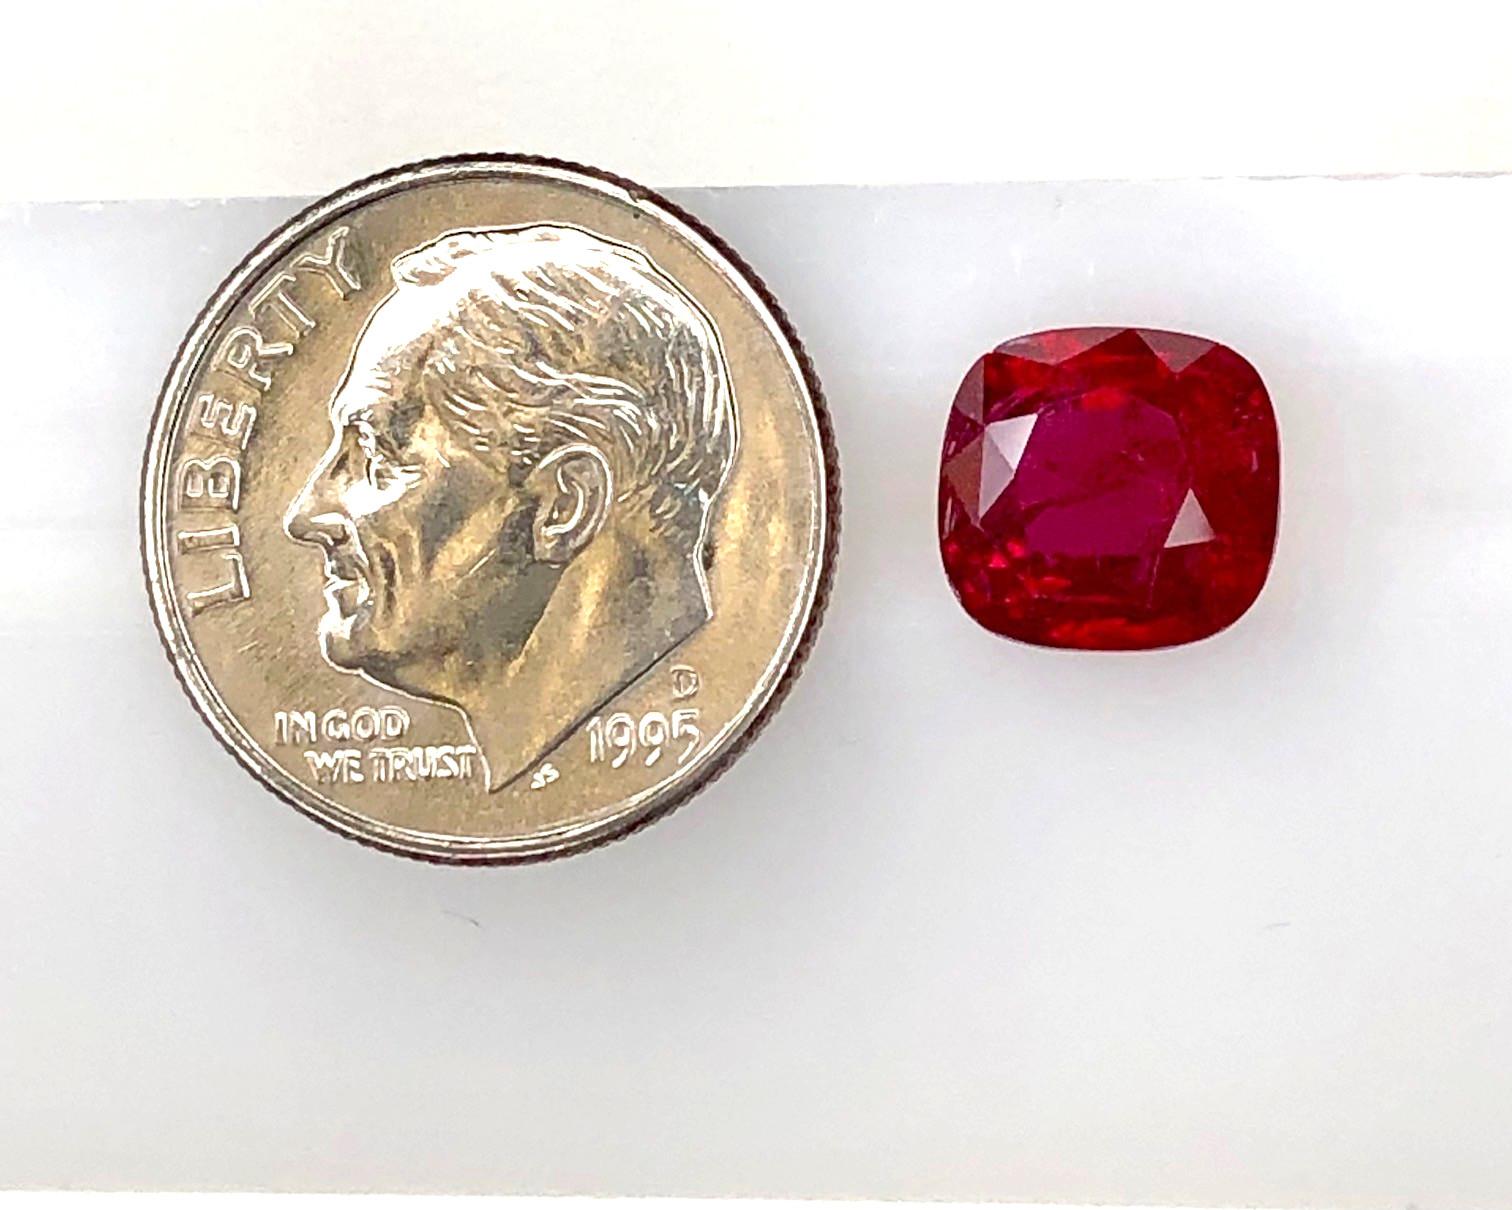 Unheated 3.53 Carat “Pigeon’s Blood” Ruby, GIA Certified 3